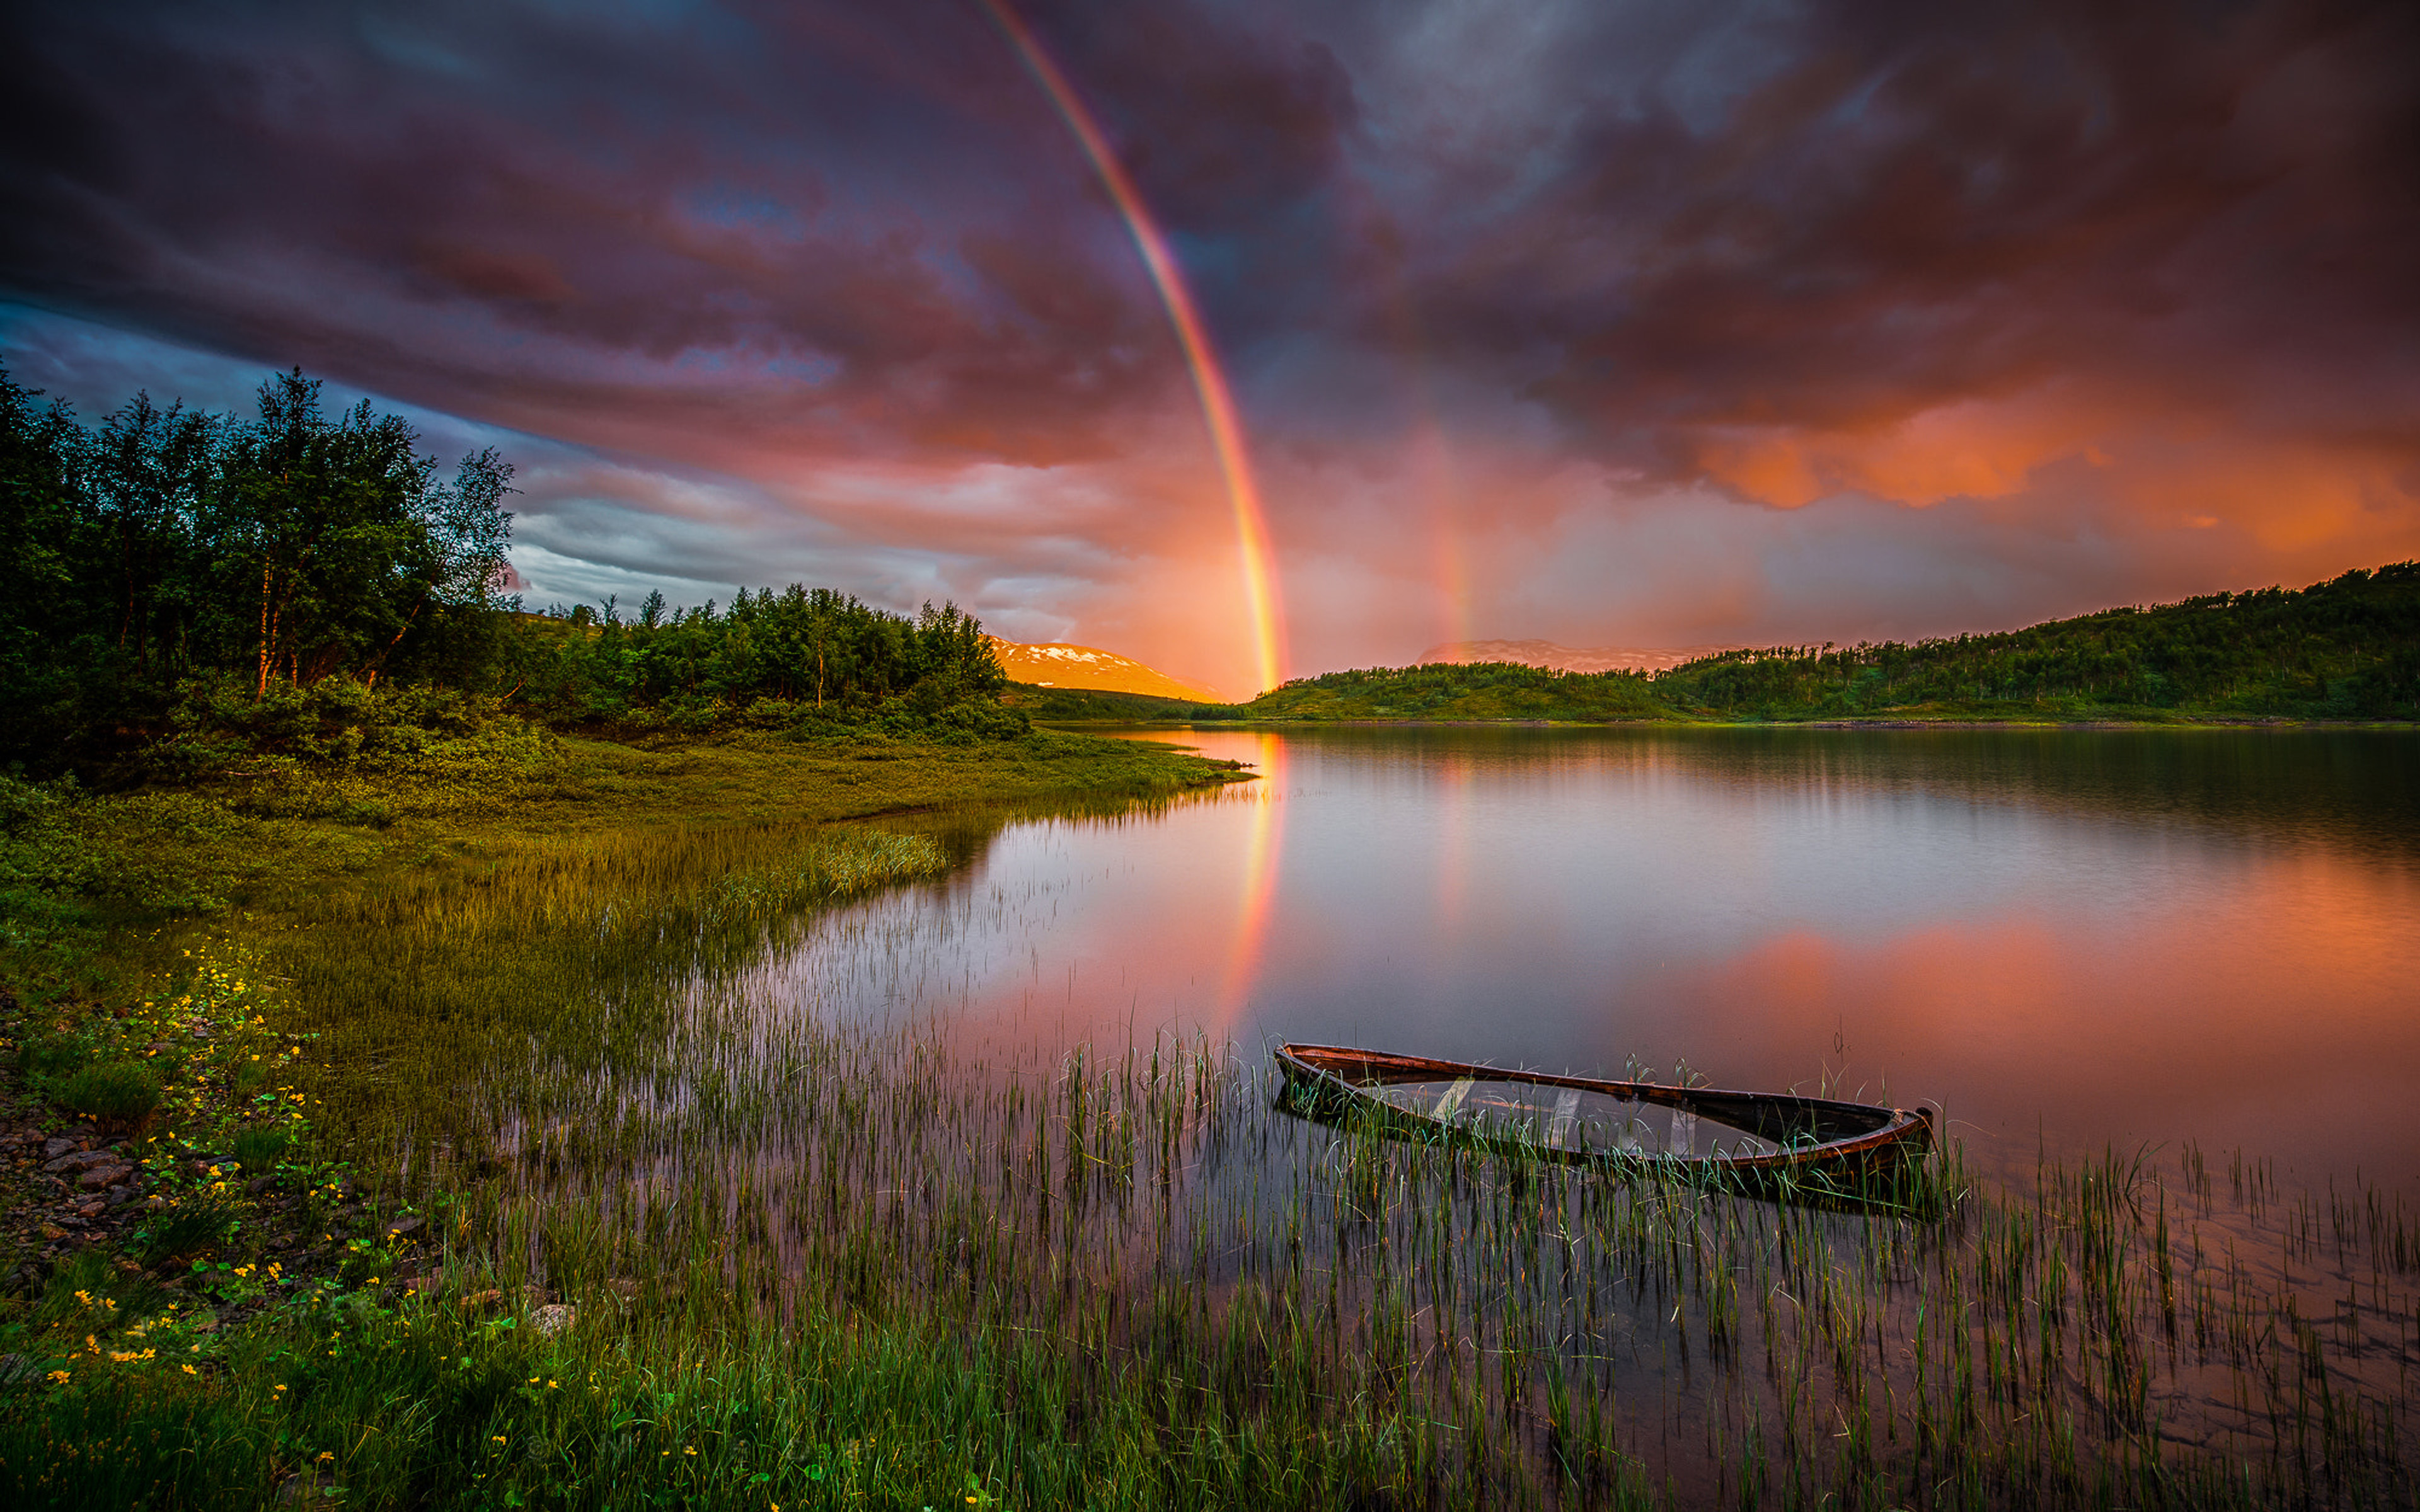 Sunset Rainbow After Rain Lake Boat Forest Trees Sky With Red Clouds  Landscape Hd Wallpaper Download For Desktop Mobile And Tablet 3840x2400 :  